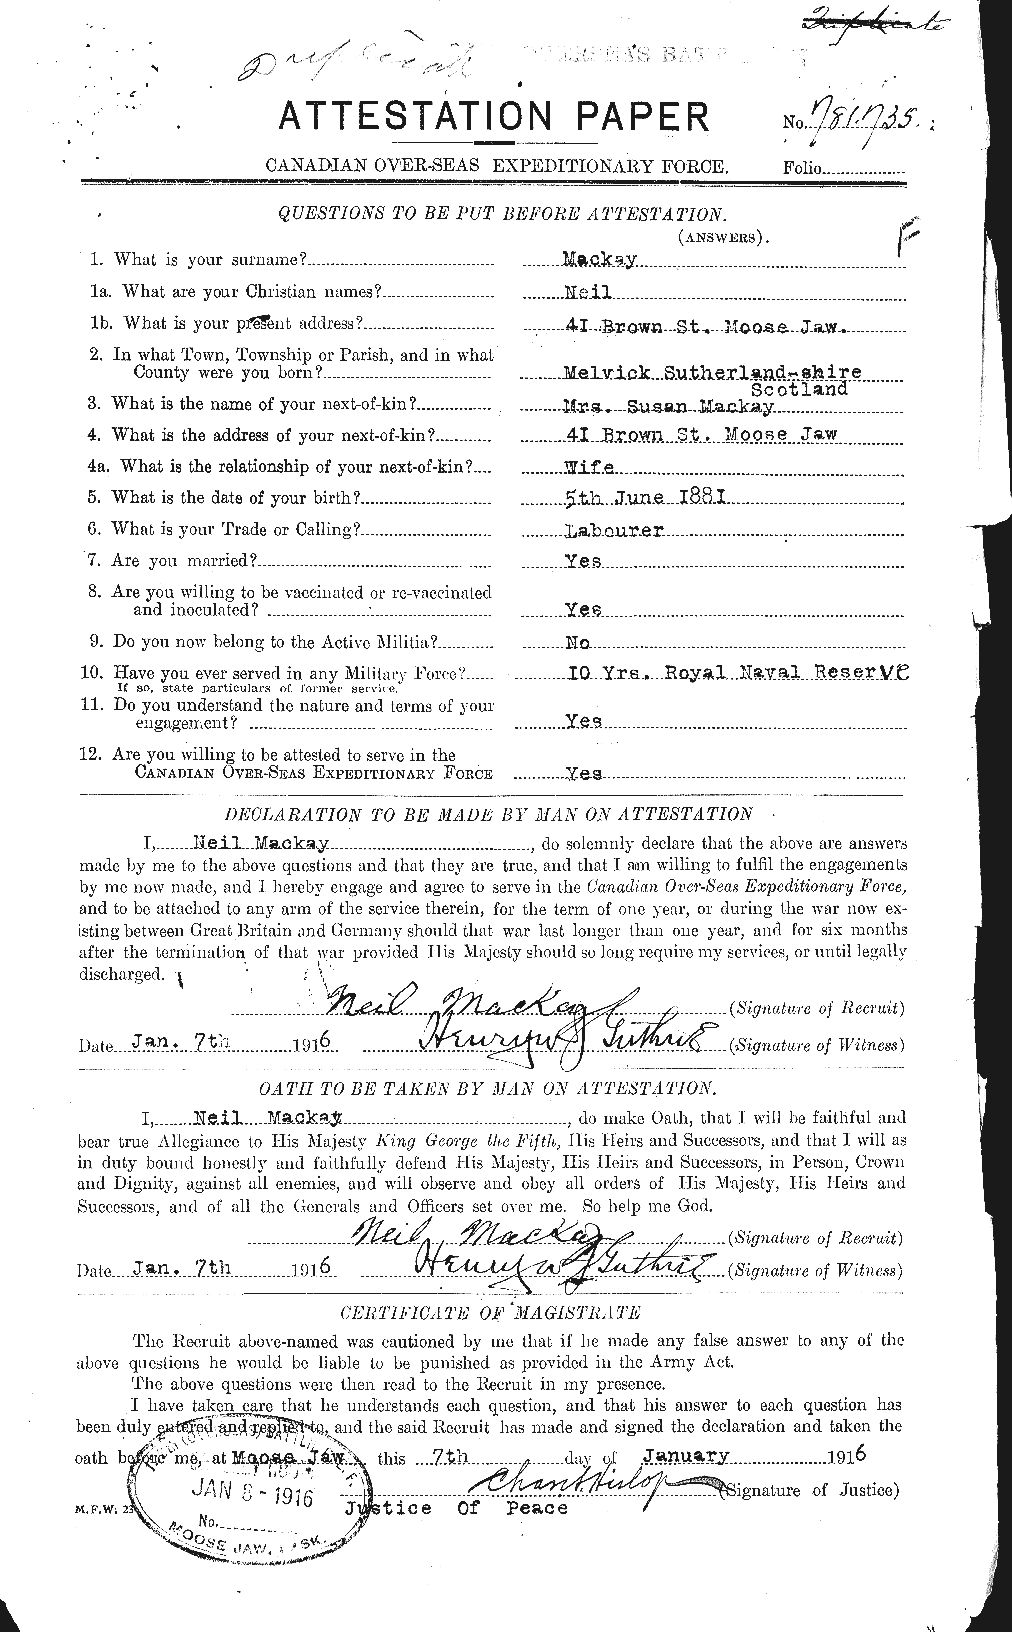 Personnel Records of the First World War - CEF 527198a